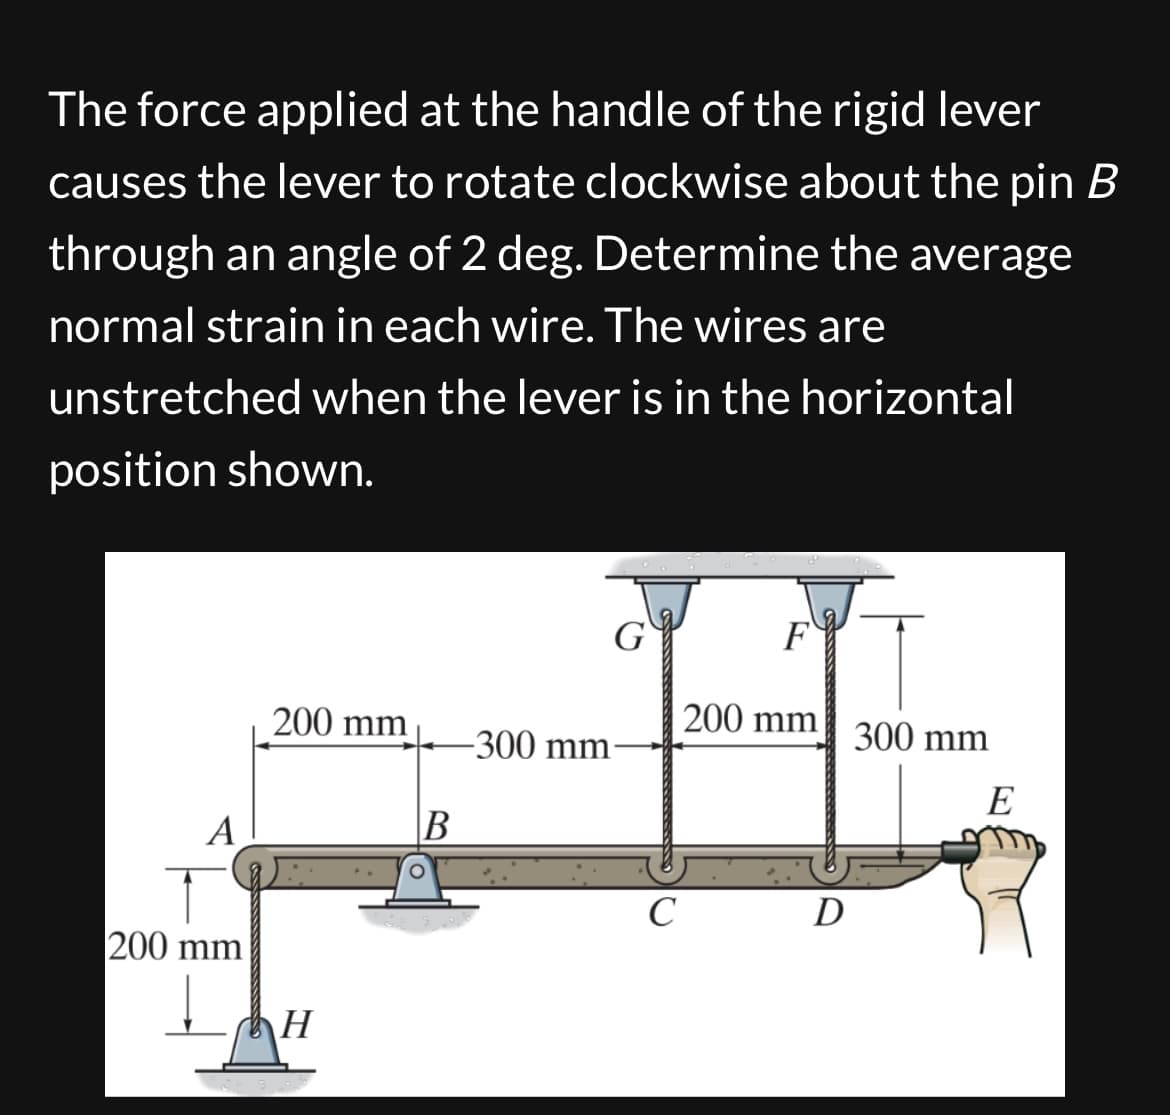 The force applied at the handle of the rigid lever
causes the lever to rotate clockwise about the pin B
through an angle of 2 deg. Determine the average
normal strain in each wire. The wires are
unstretched when the lever is in the horizontal
position shown.
G
F
200 mm
200 mm
300 mm
-300 mm-
E
A
B
C
D
200 mm
H